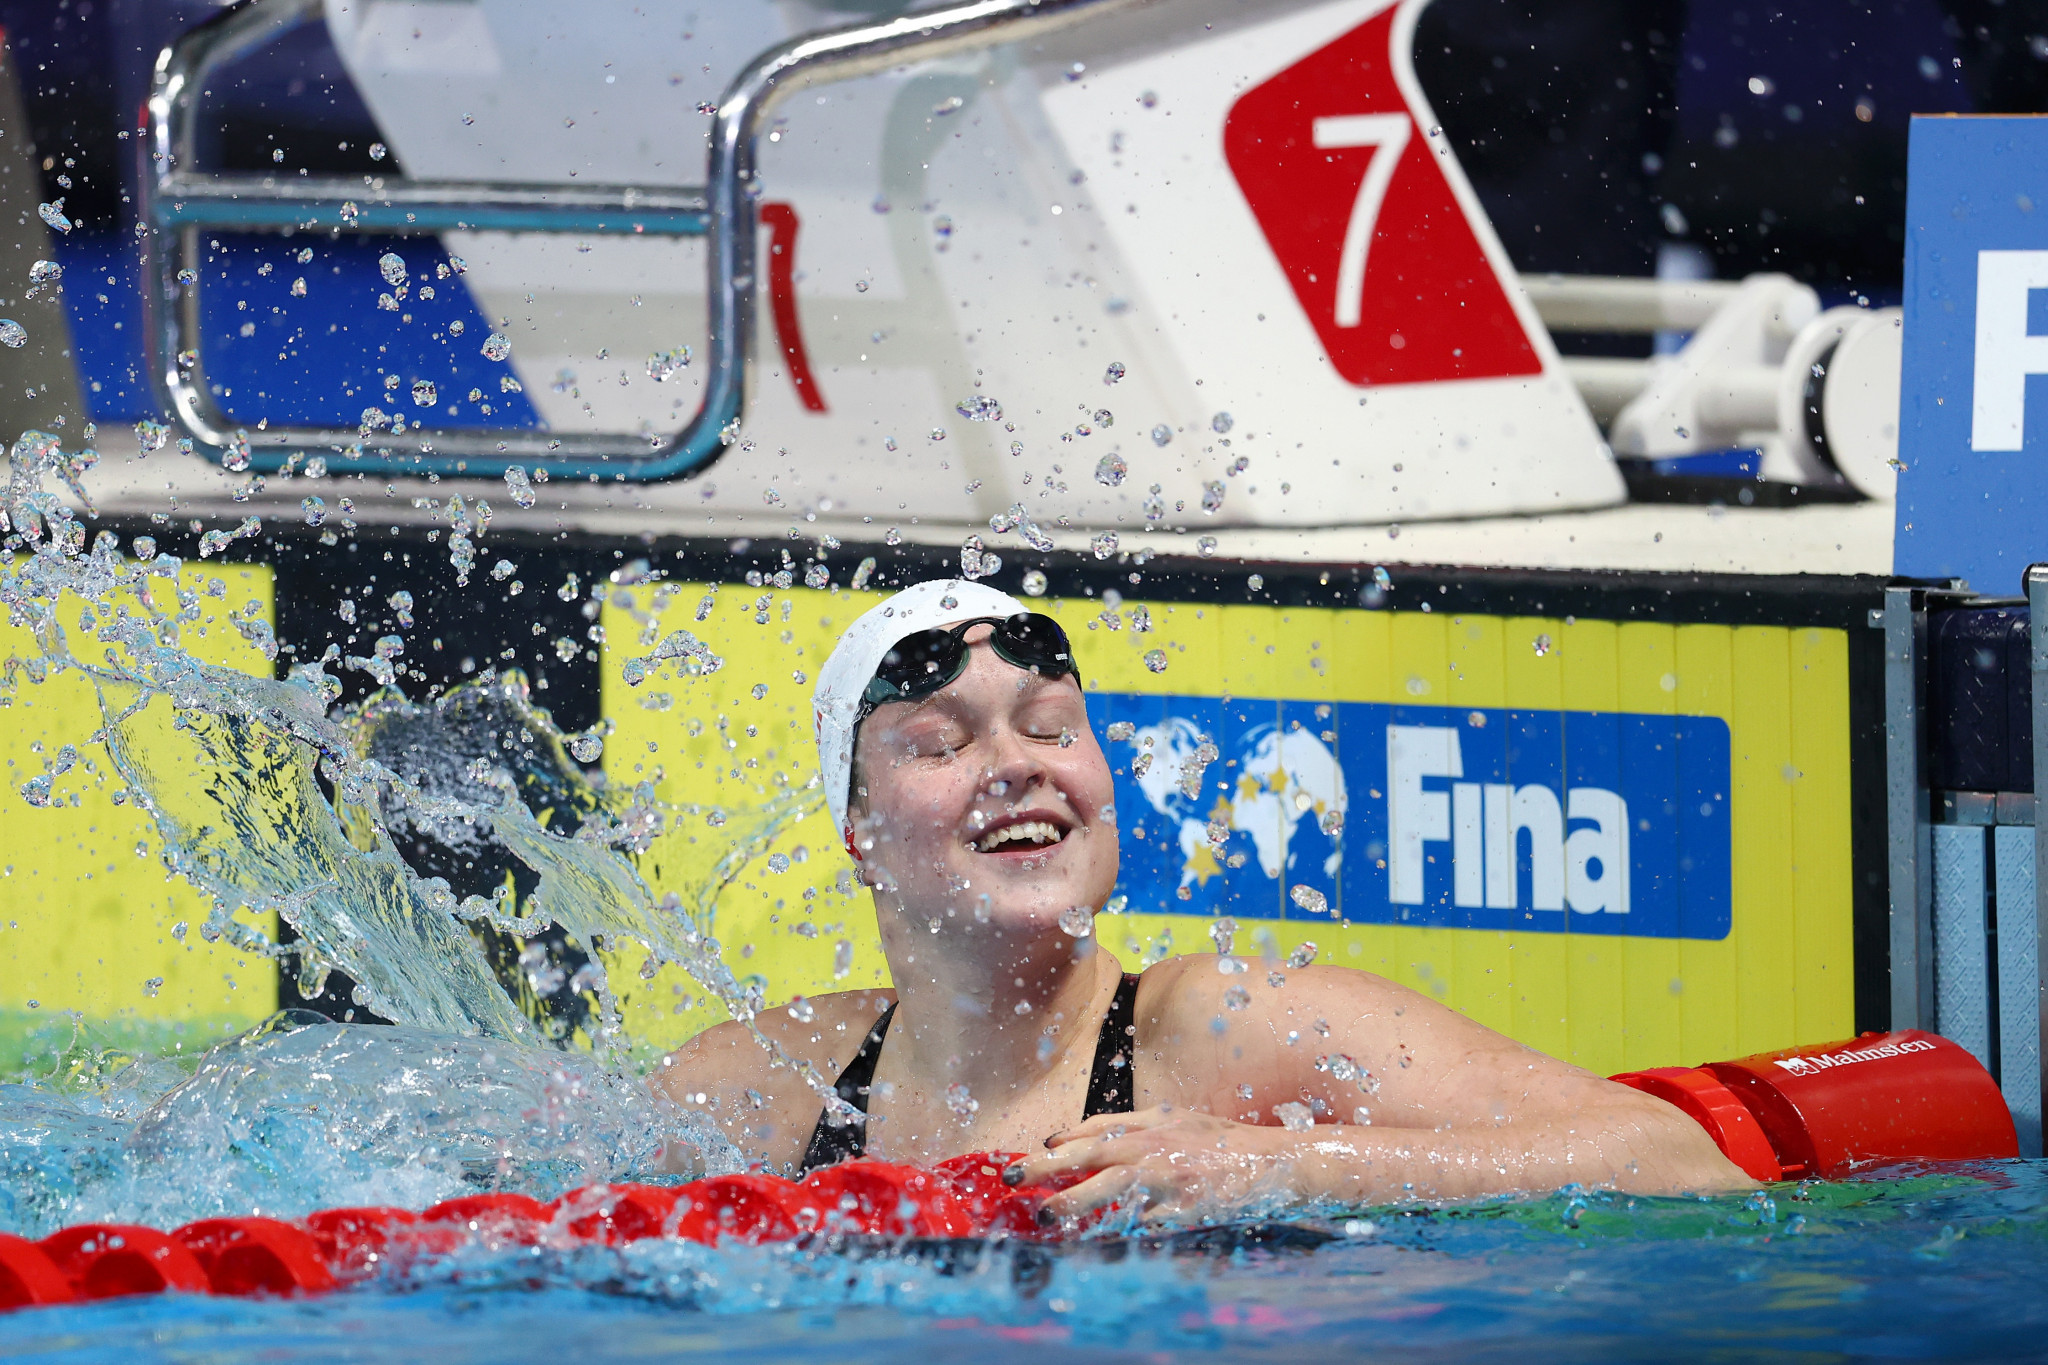 Israel's Anastasia Gorbenko is overjoyed after capturing the women's 50m breaststroke crown ©Getty Images